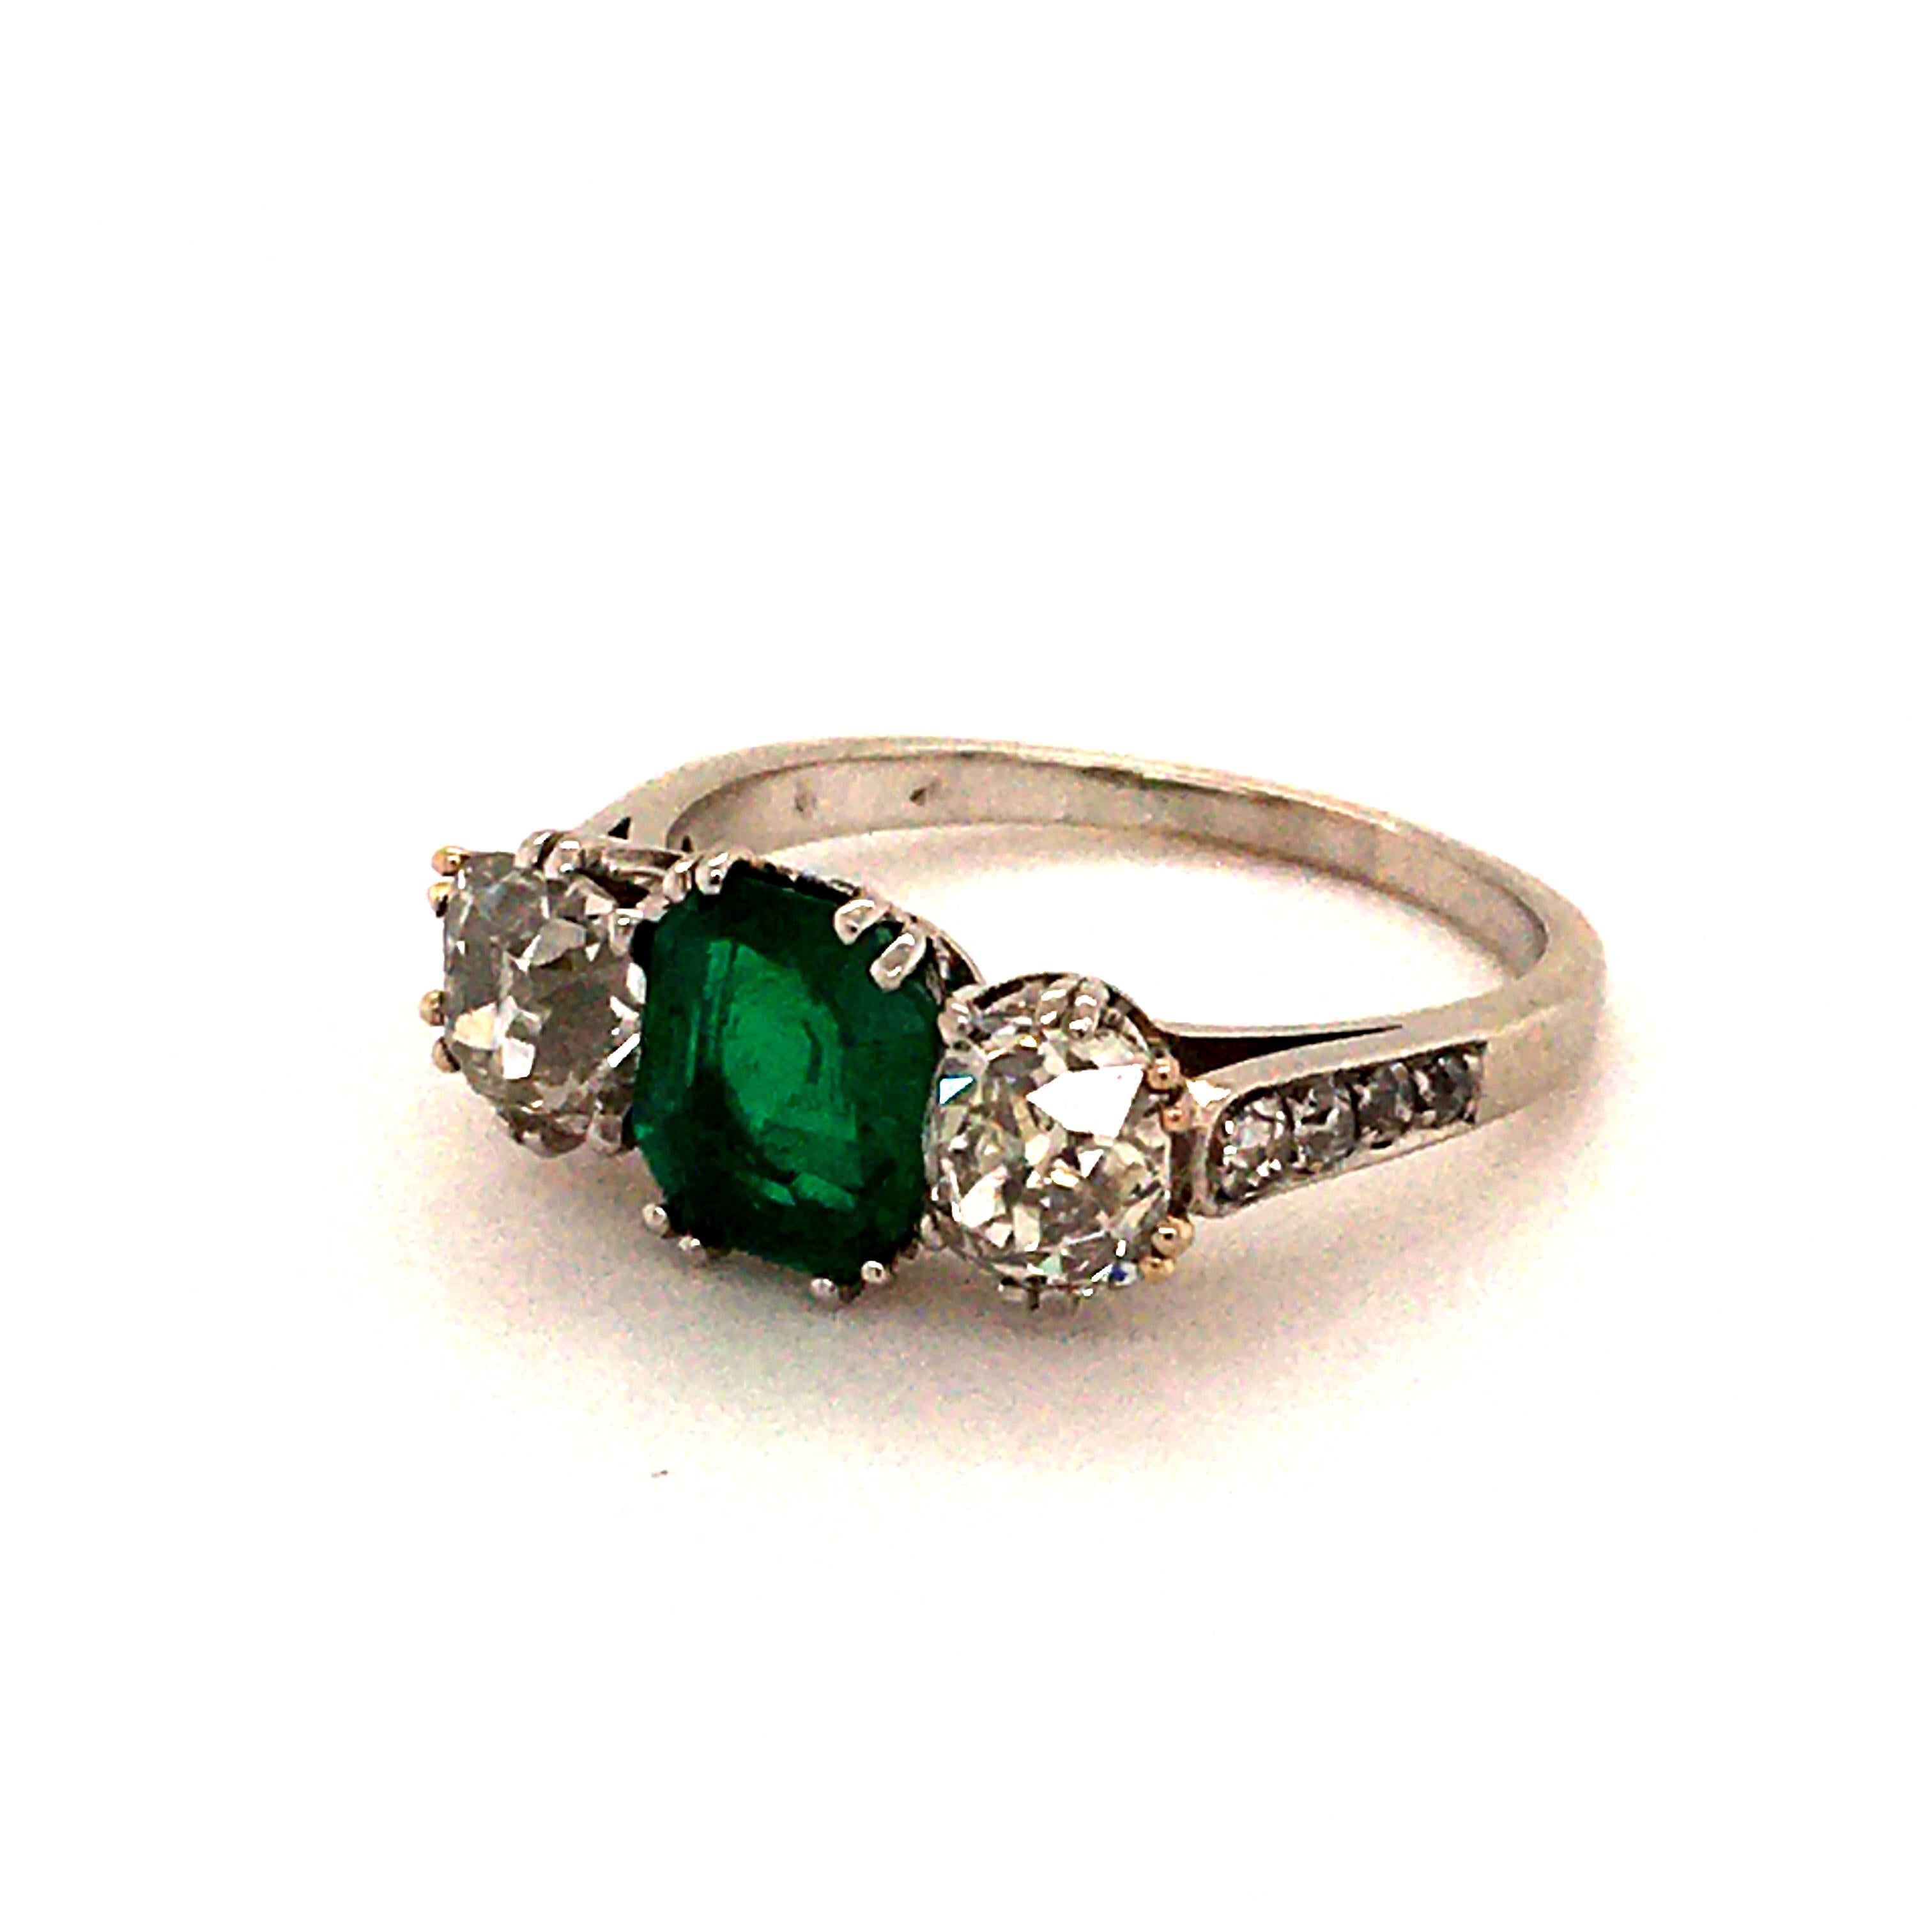 This antique stunner is made in platinum 950 and set with following stones:

1 emerald cut emerald of beautiful green colour approx. 1.40 ct, Colombian origin
2 old mine cut diamonds totaling approx. 1.30 ct of I/J-vs/si1 quality
8 old cut diamonds